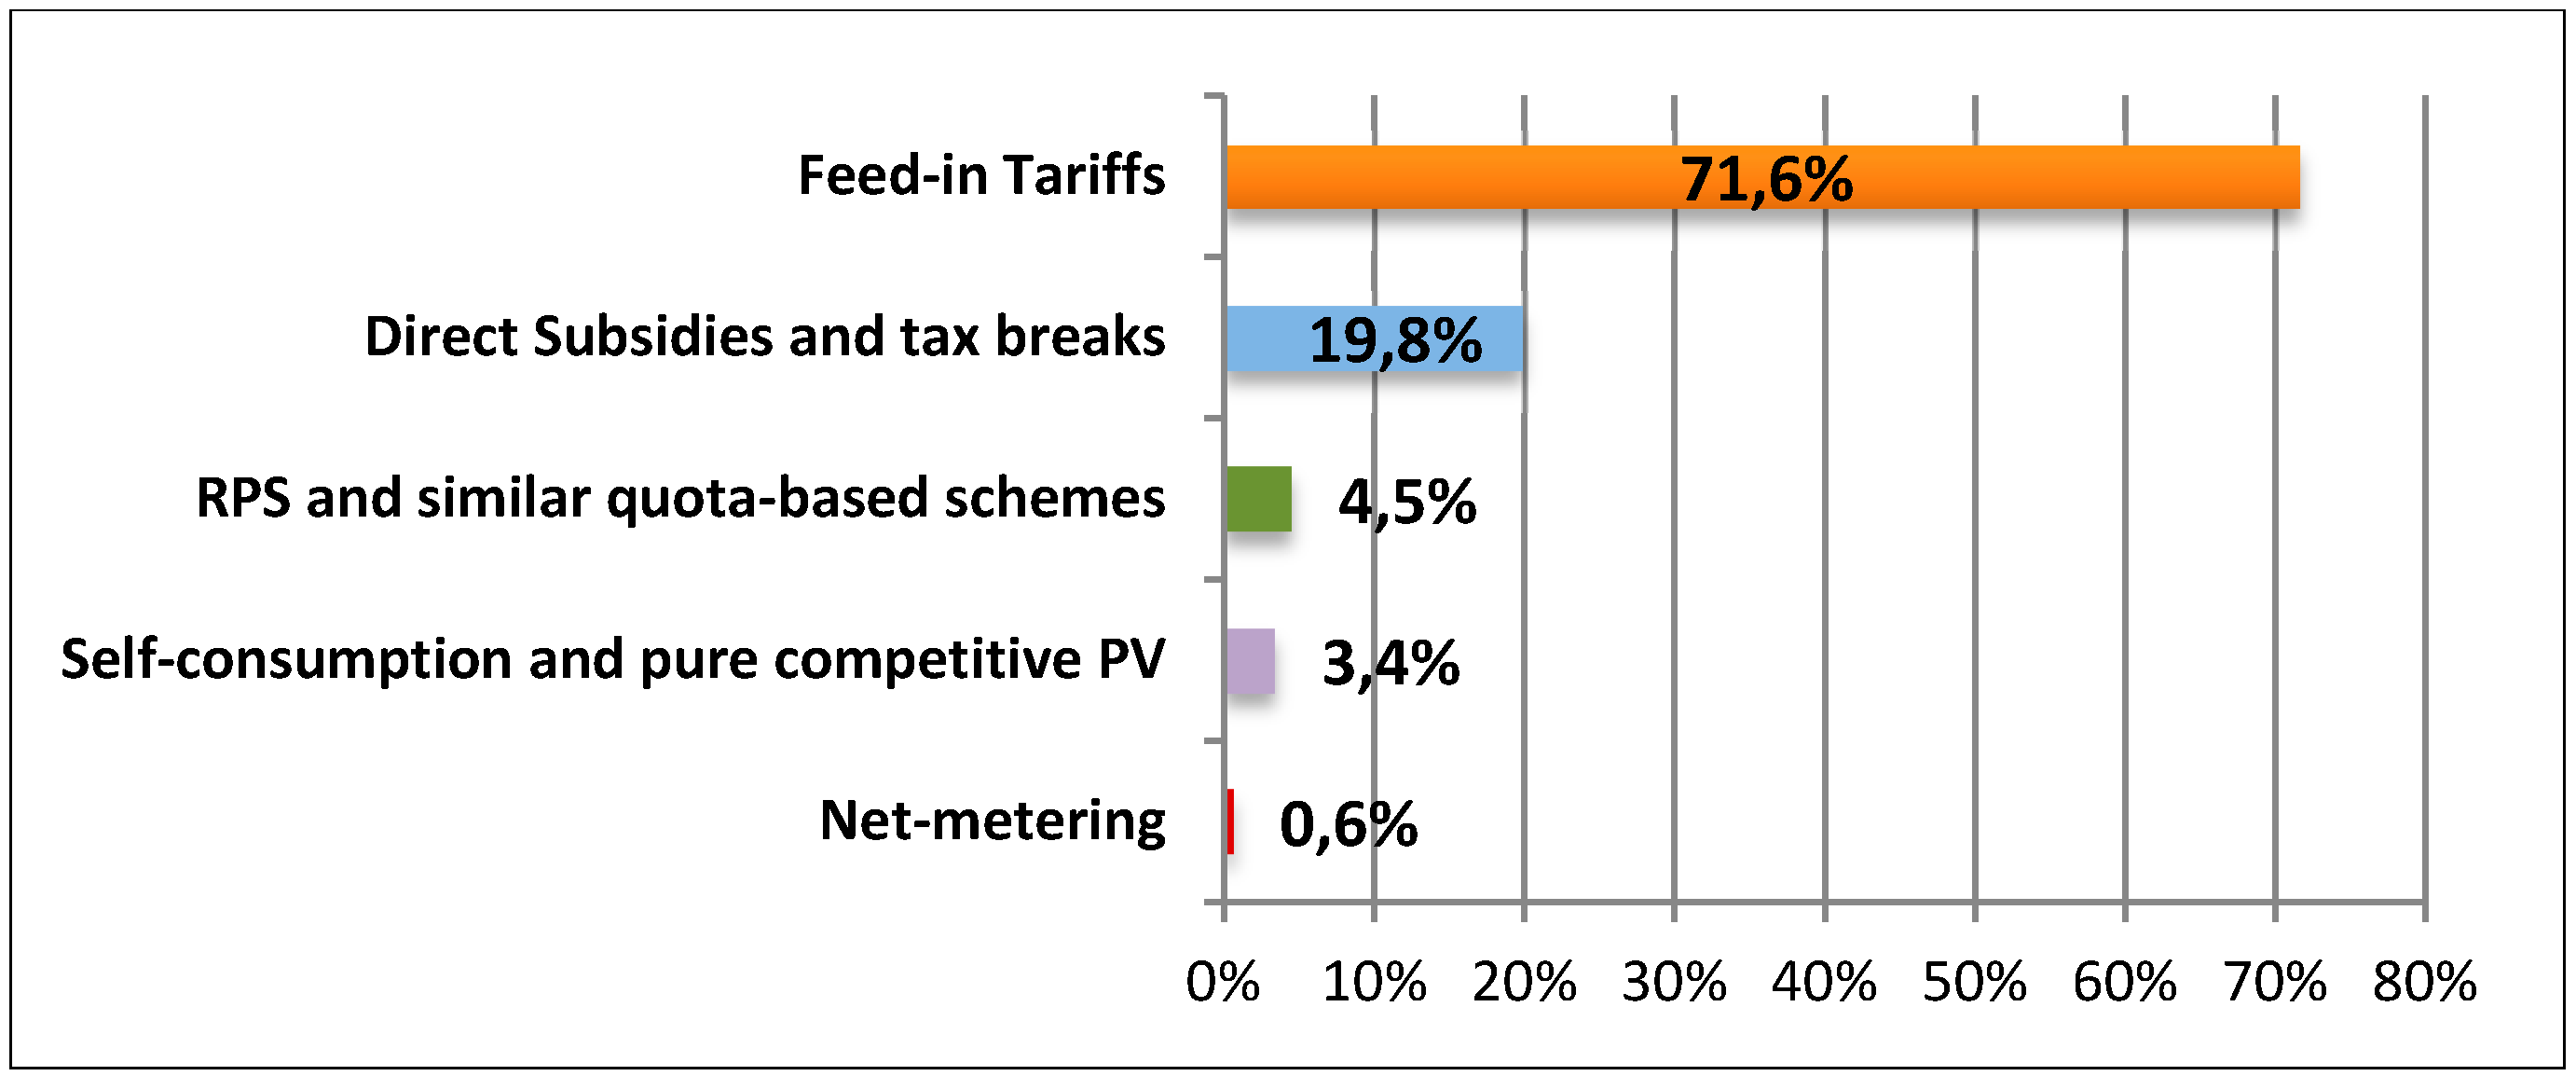 Sustainability | Free Full-Text | Assessment of the Influence of Feed-In  Tariffs on the Profitability of European Photovoltaic Companies